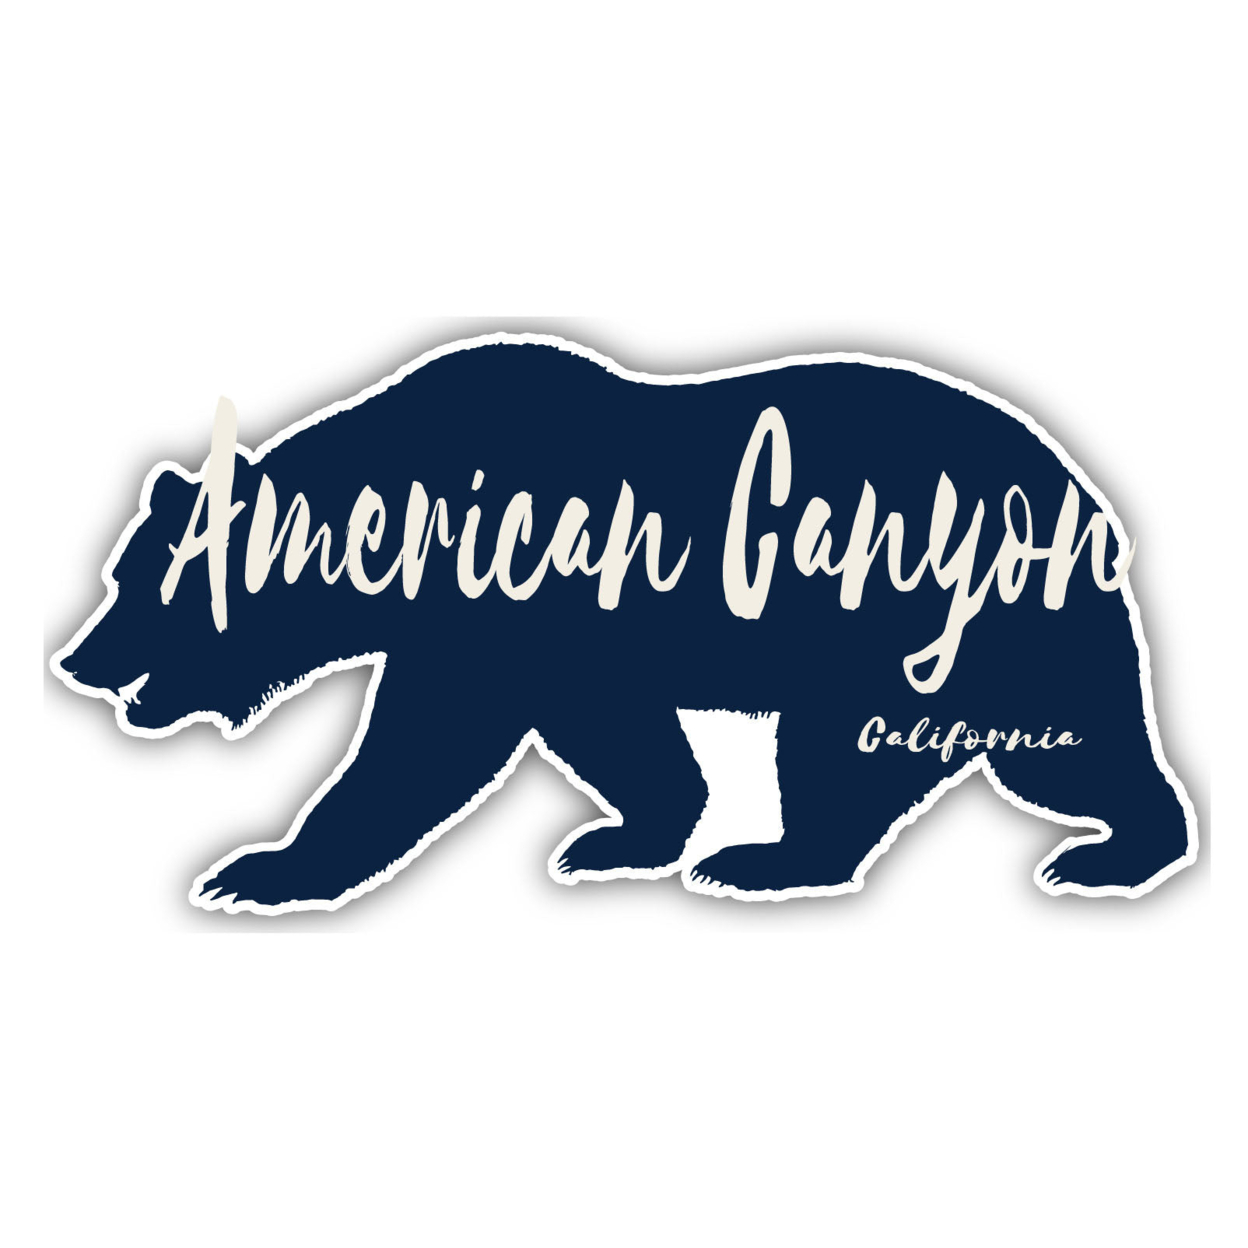 American Canyon California Souvenir Decorative Stickers (Choose Theme And Size) - 4-Pack, 8-Inch, Bear